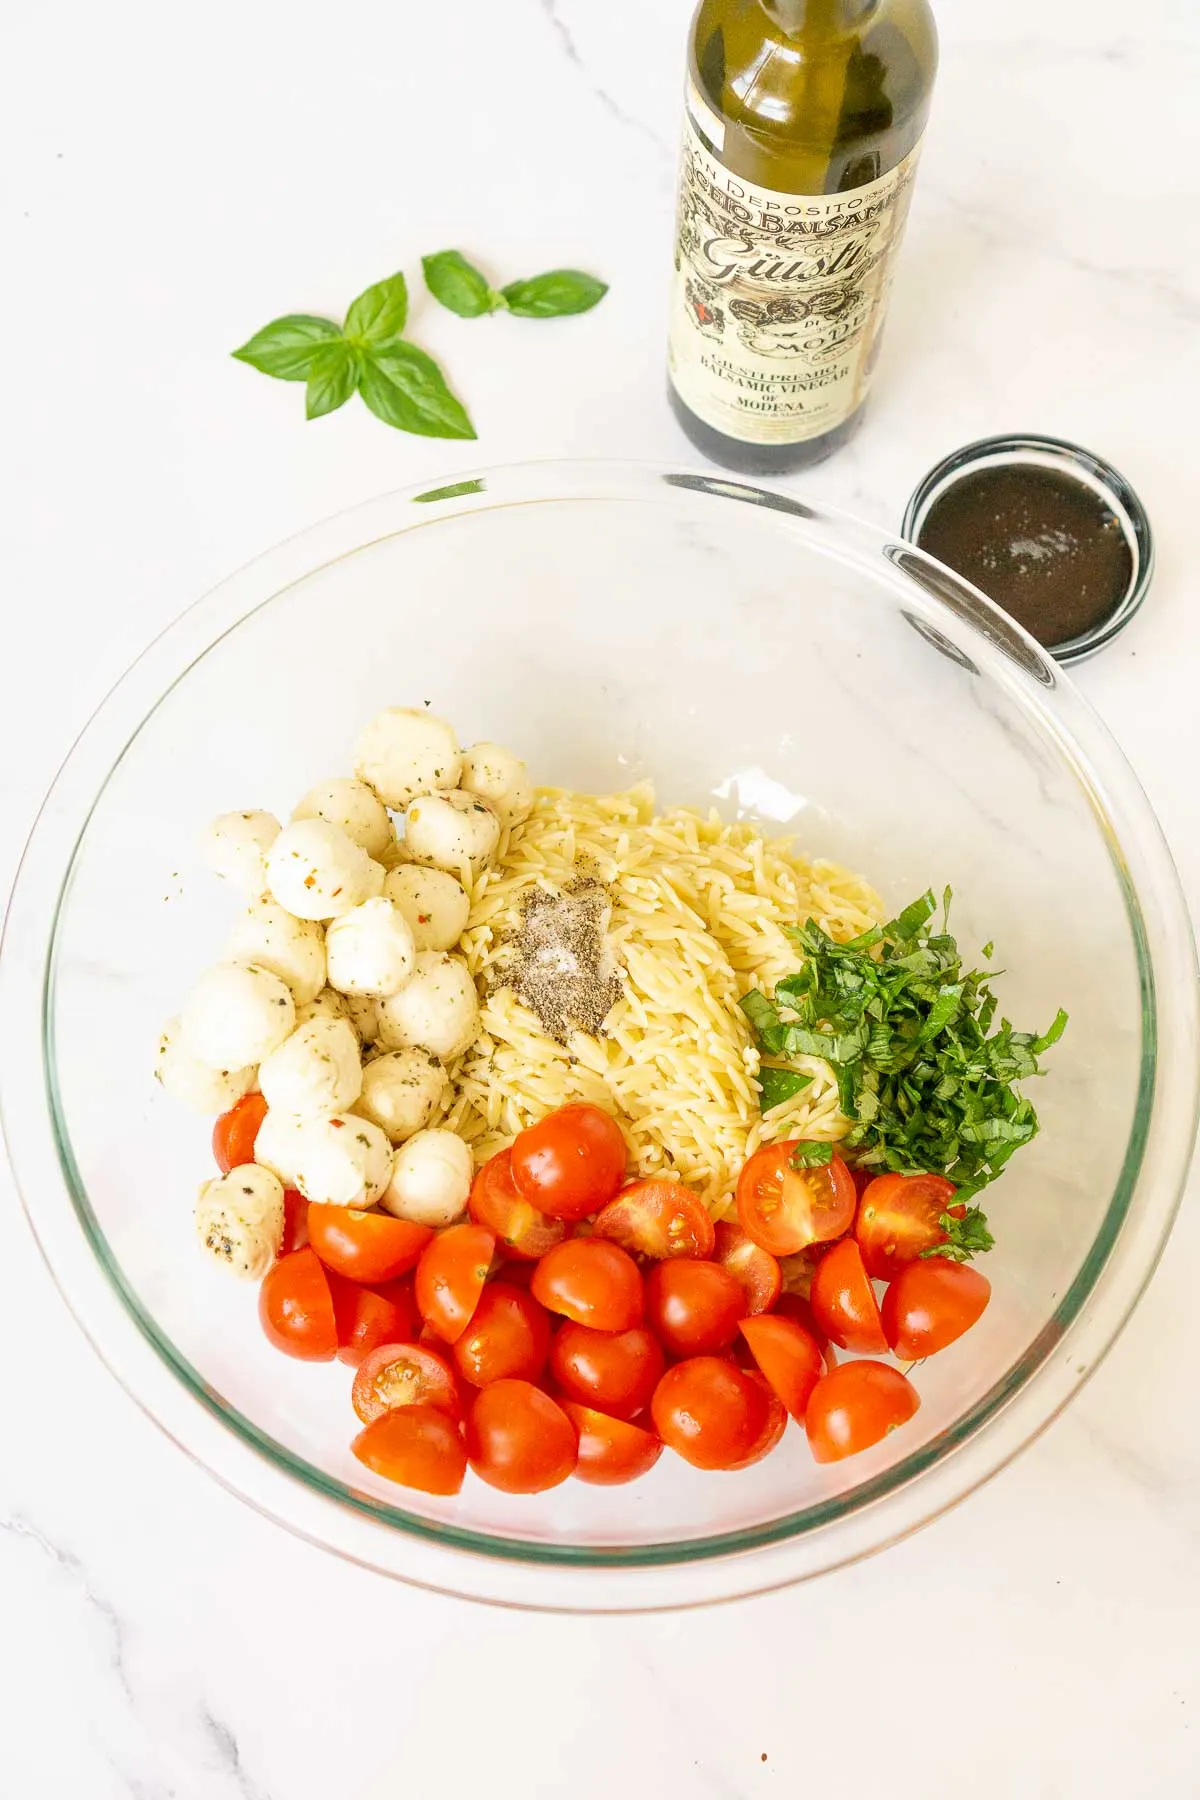 Orzo caprese salad ingredients in a mixing bowl